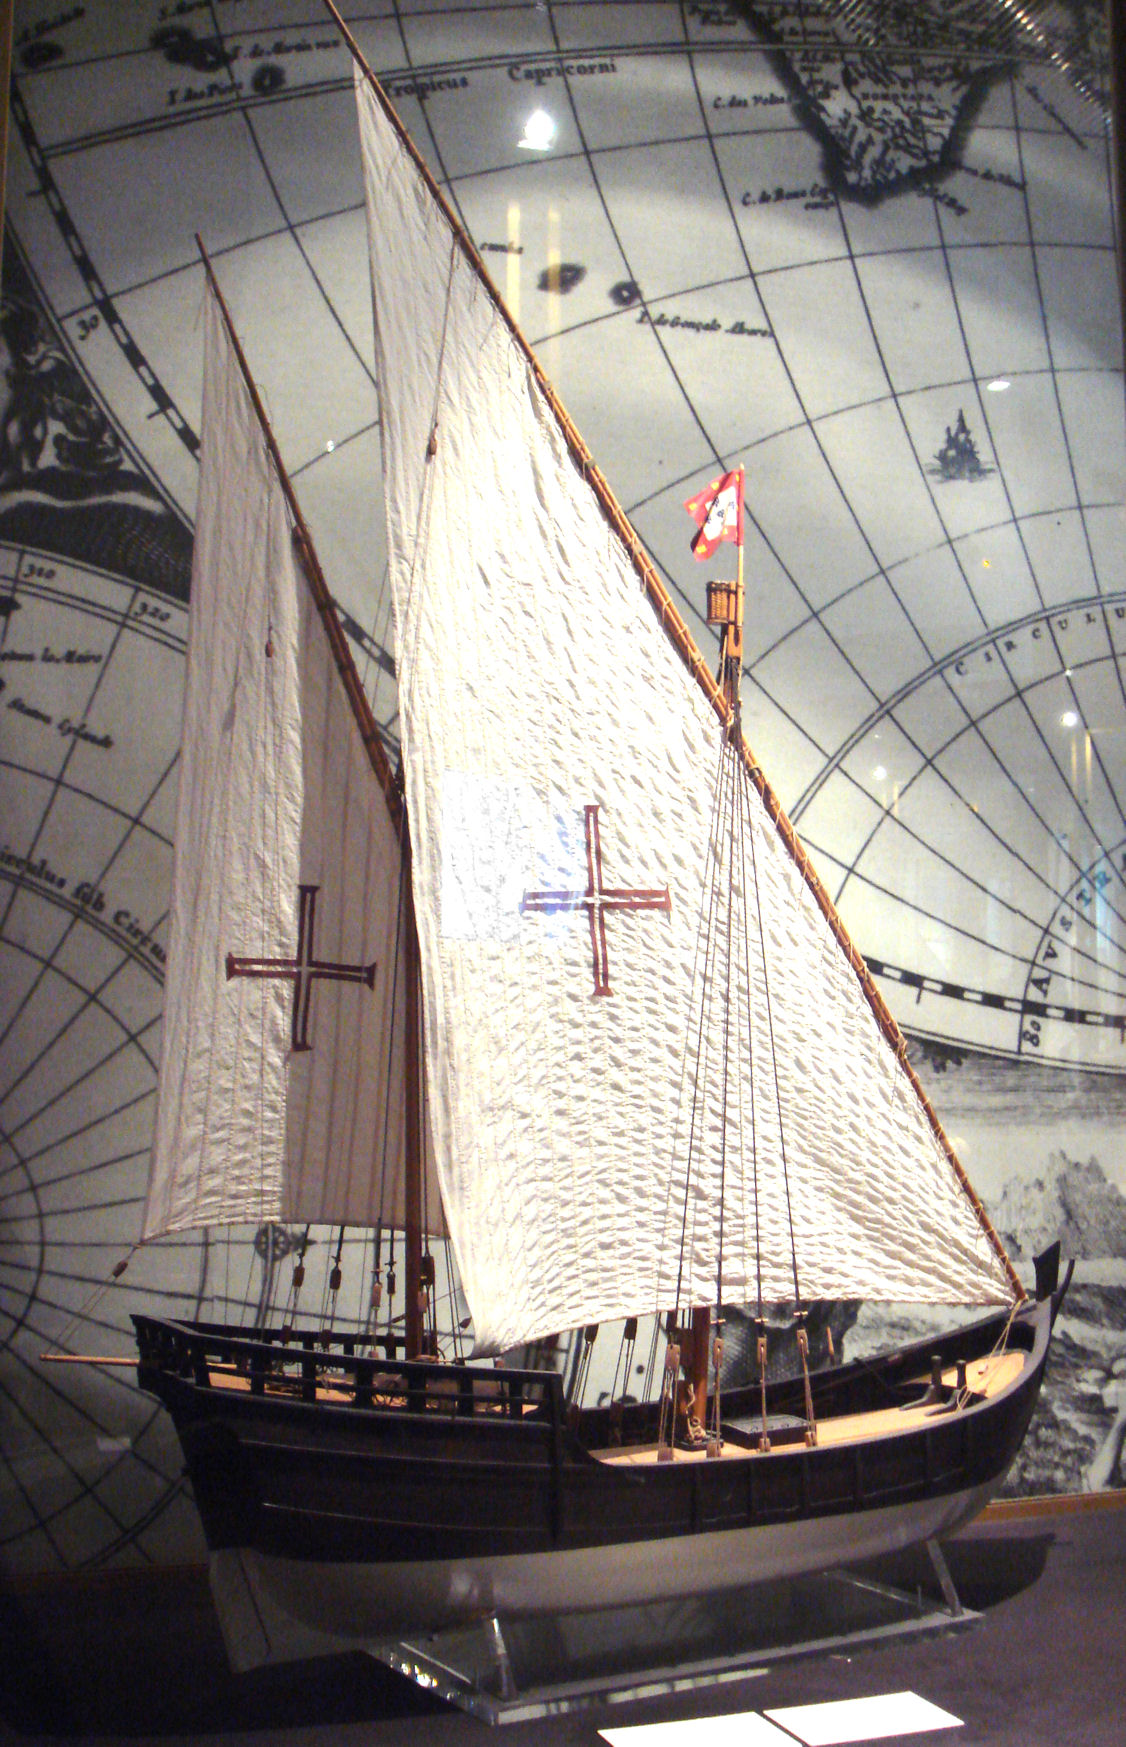 Portugues caravel was instrumental for exploring the
    Atlanti and the sea route around Africa to India. (<A
    href='https://commons.wikimedia.org/w/index.php?curid=3011829'> By
    PHGCOM - Own work, CC BY-SA 3.0</A>).